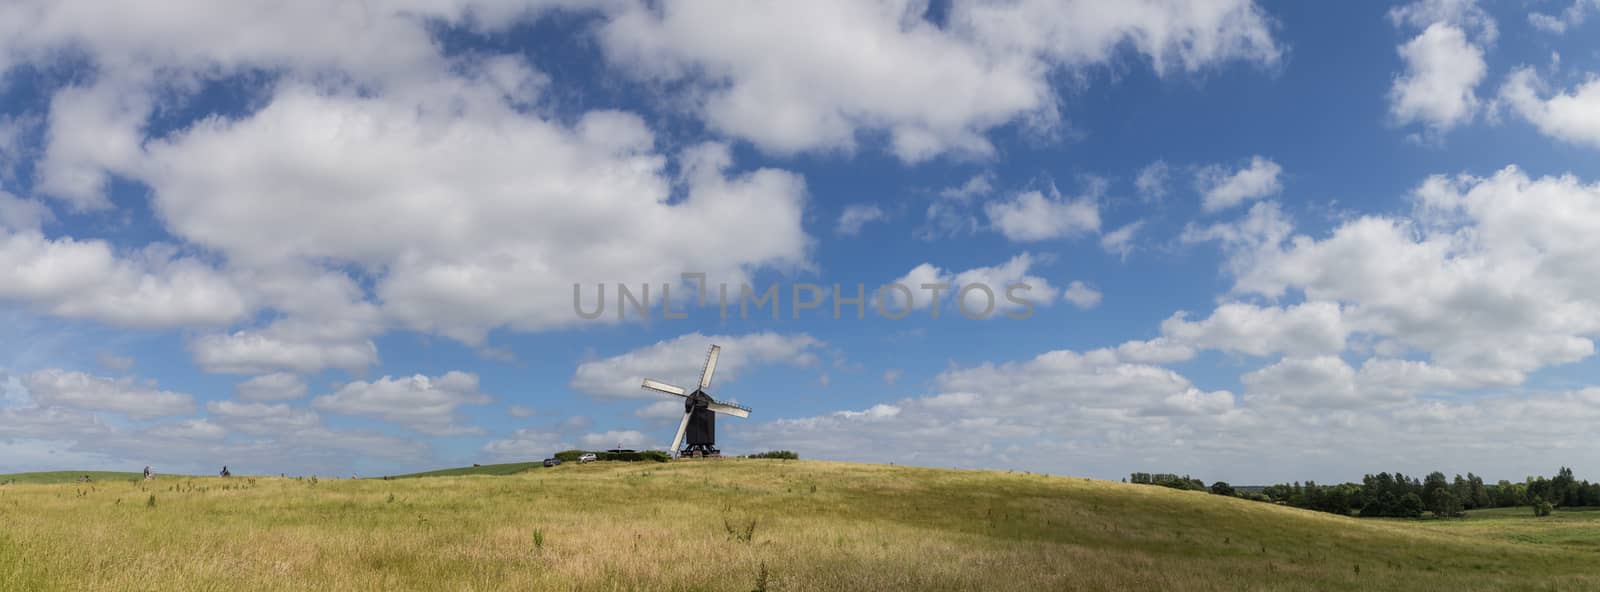 Hoejerg, Denmark - June 19, 2016: Panoramic landscape view of Historic Danish windmill called Pibe Moelle